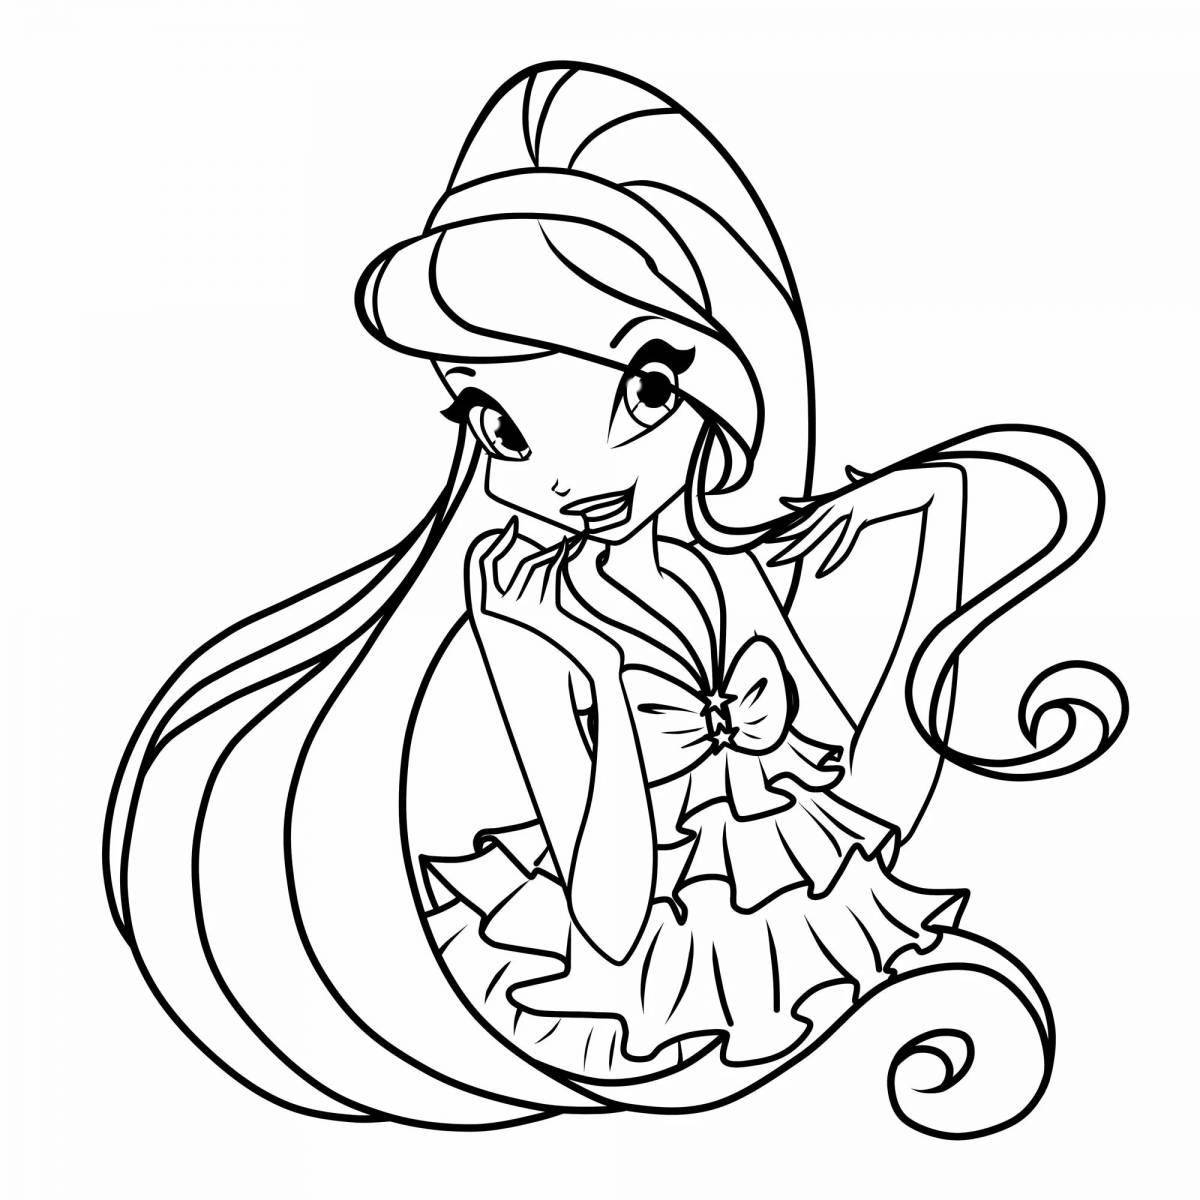 Amazing winx pictures coloring pages